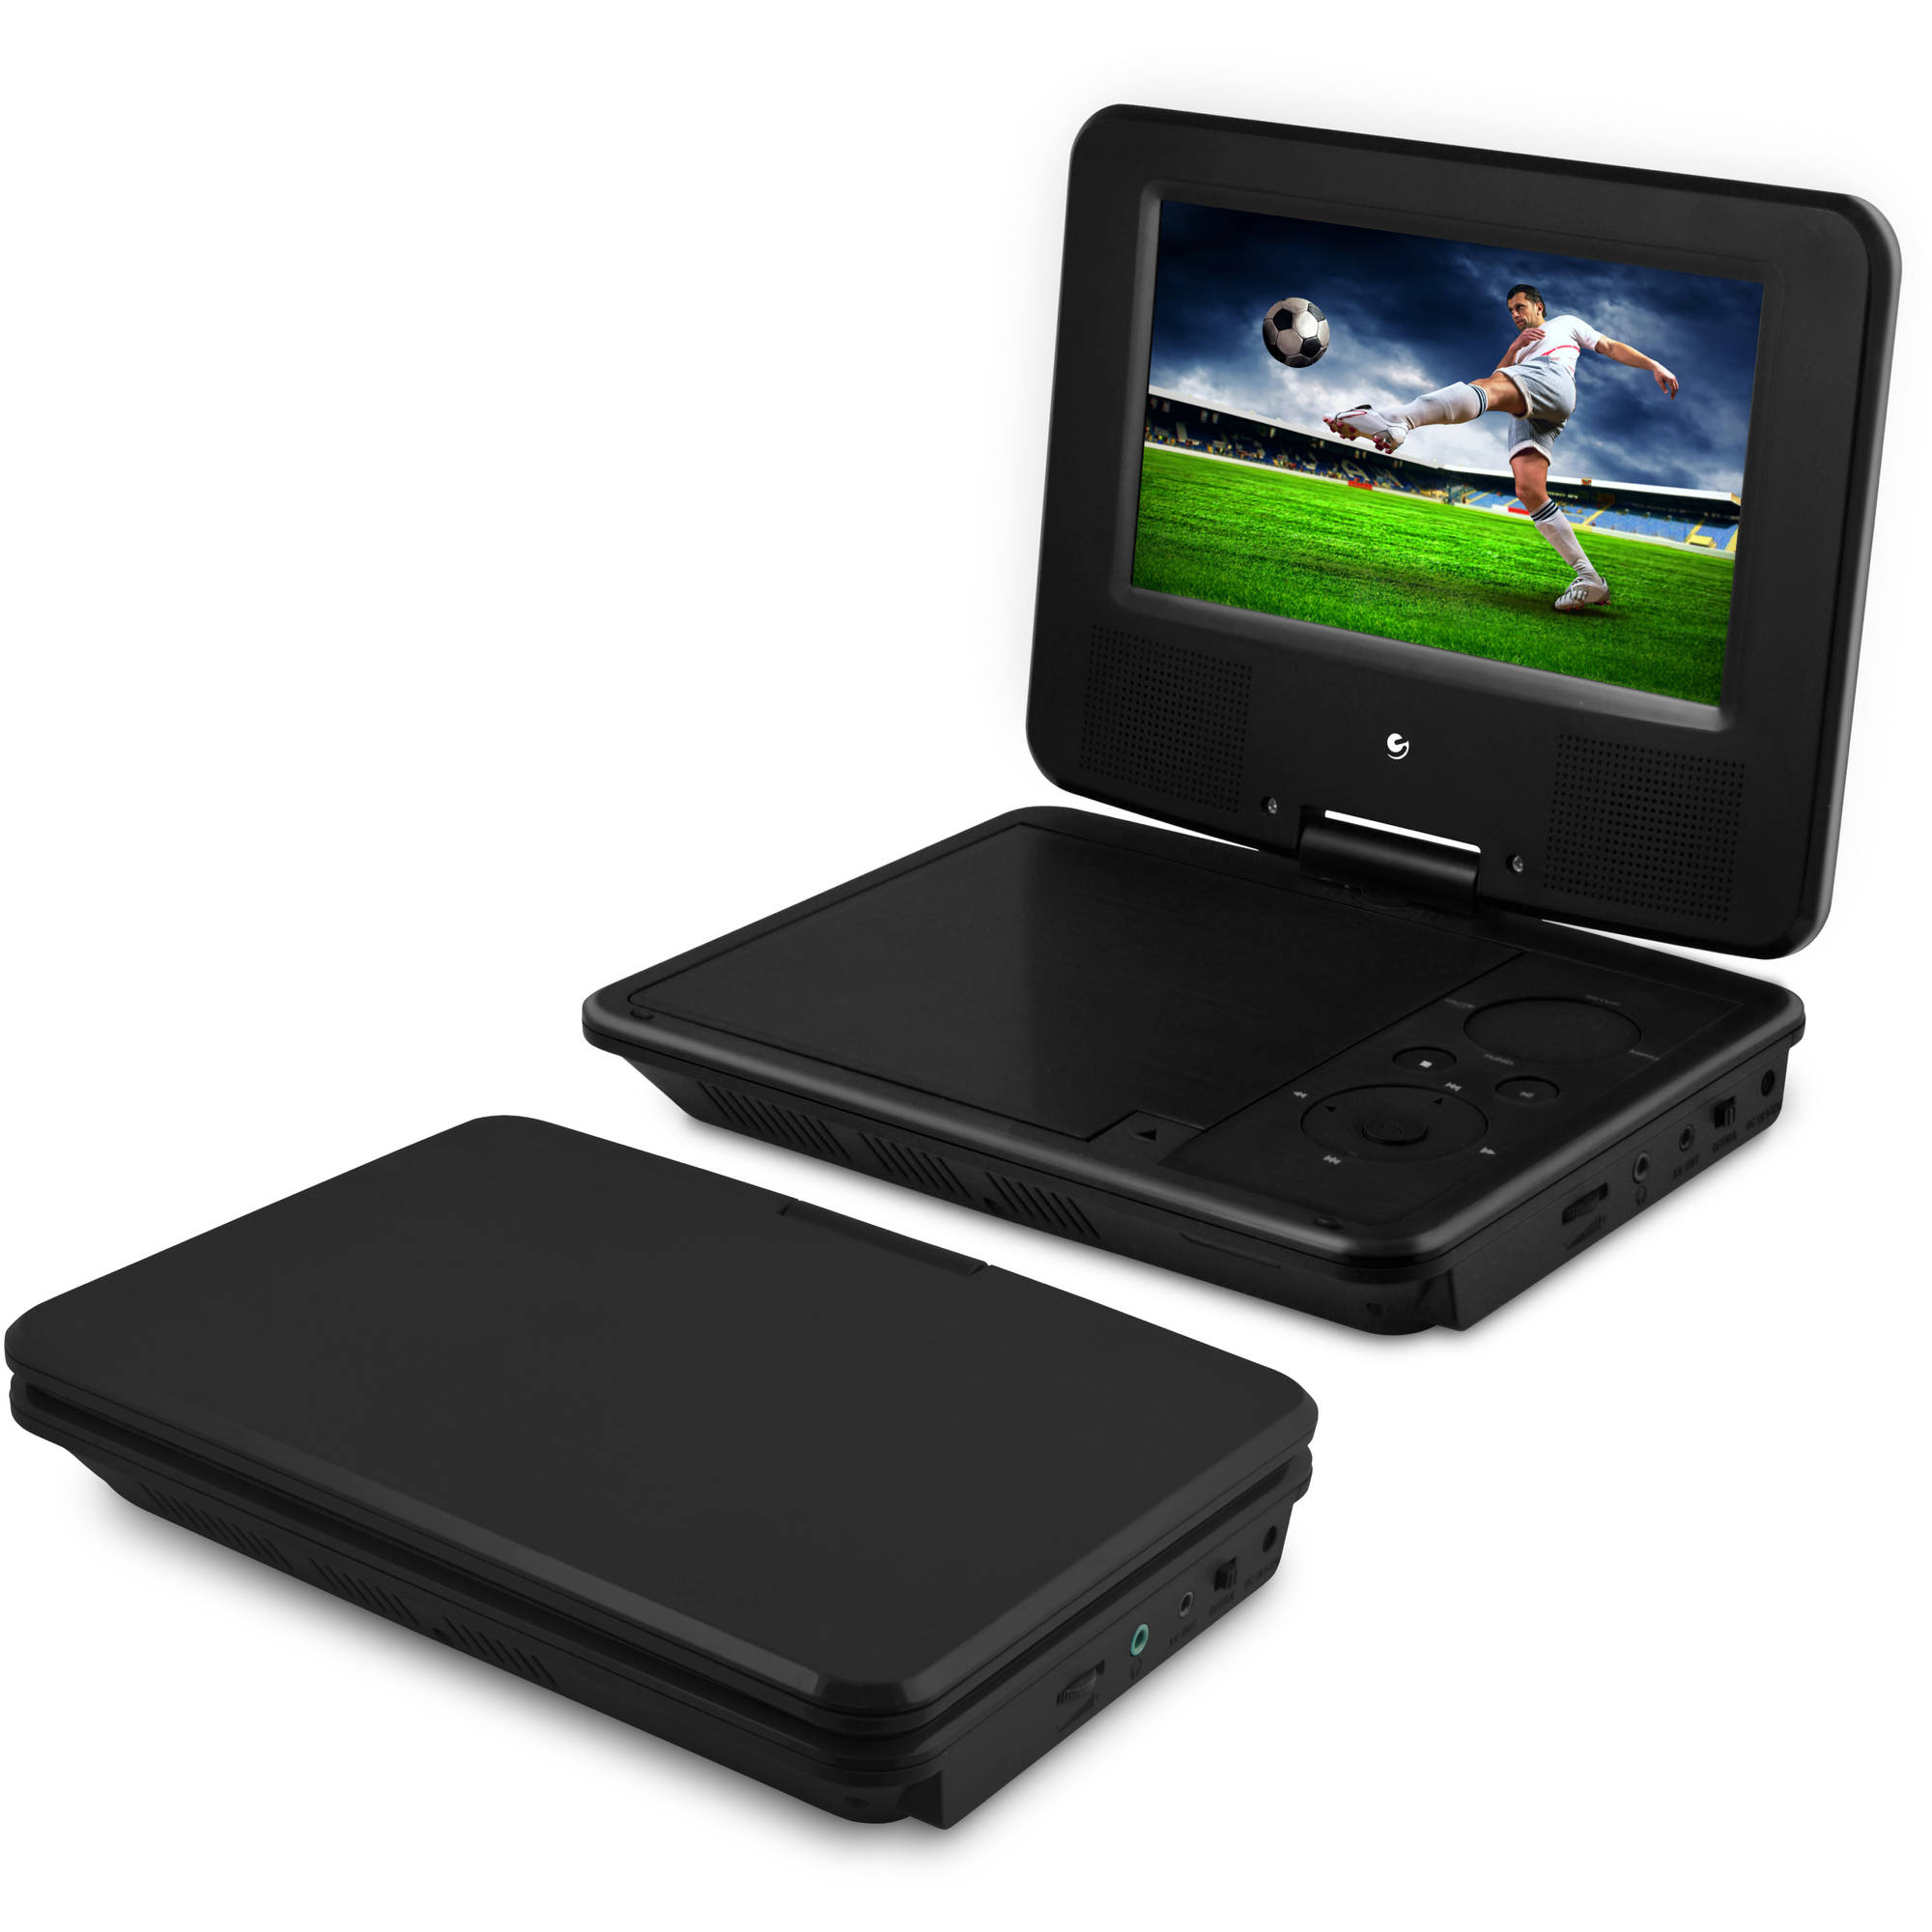 Ematic 7" Portable DVD Player with Matching Headphones and Bag - EPD707bl - image 5 of 8